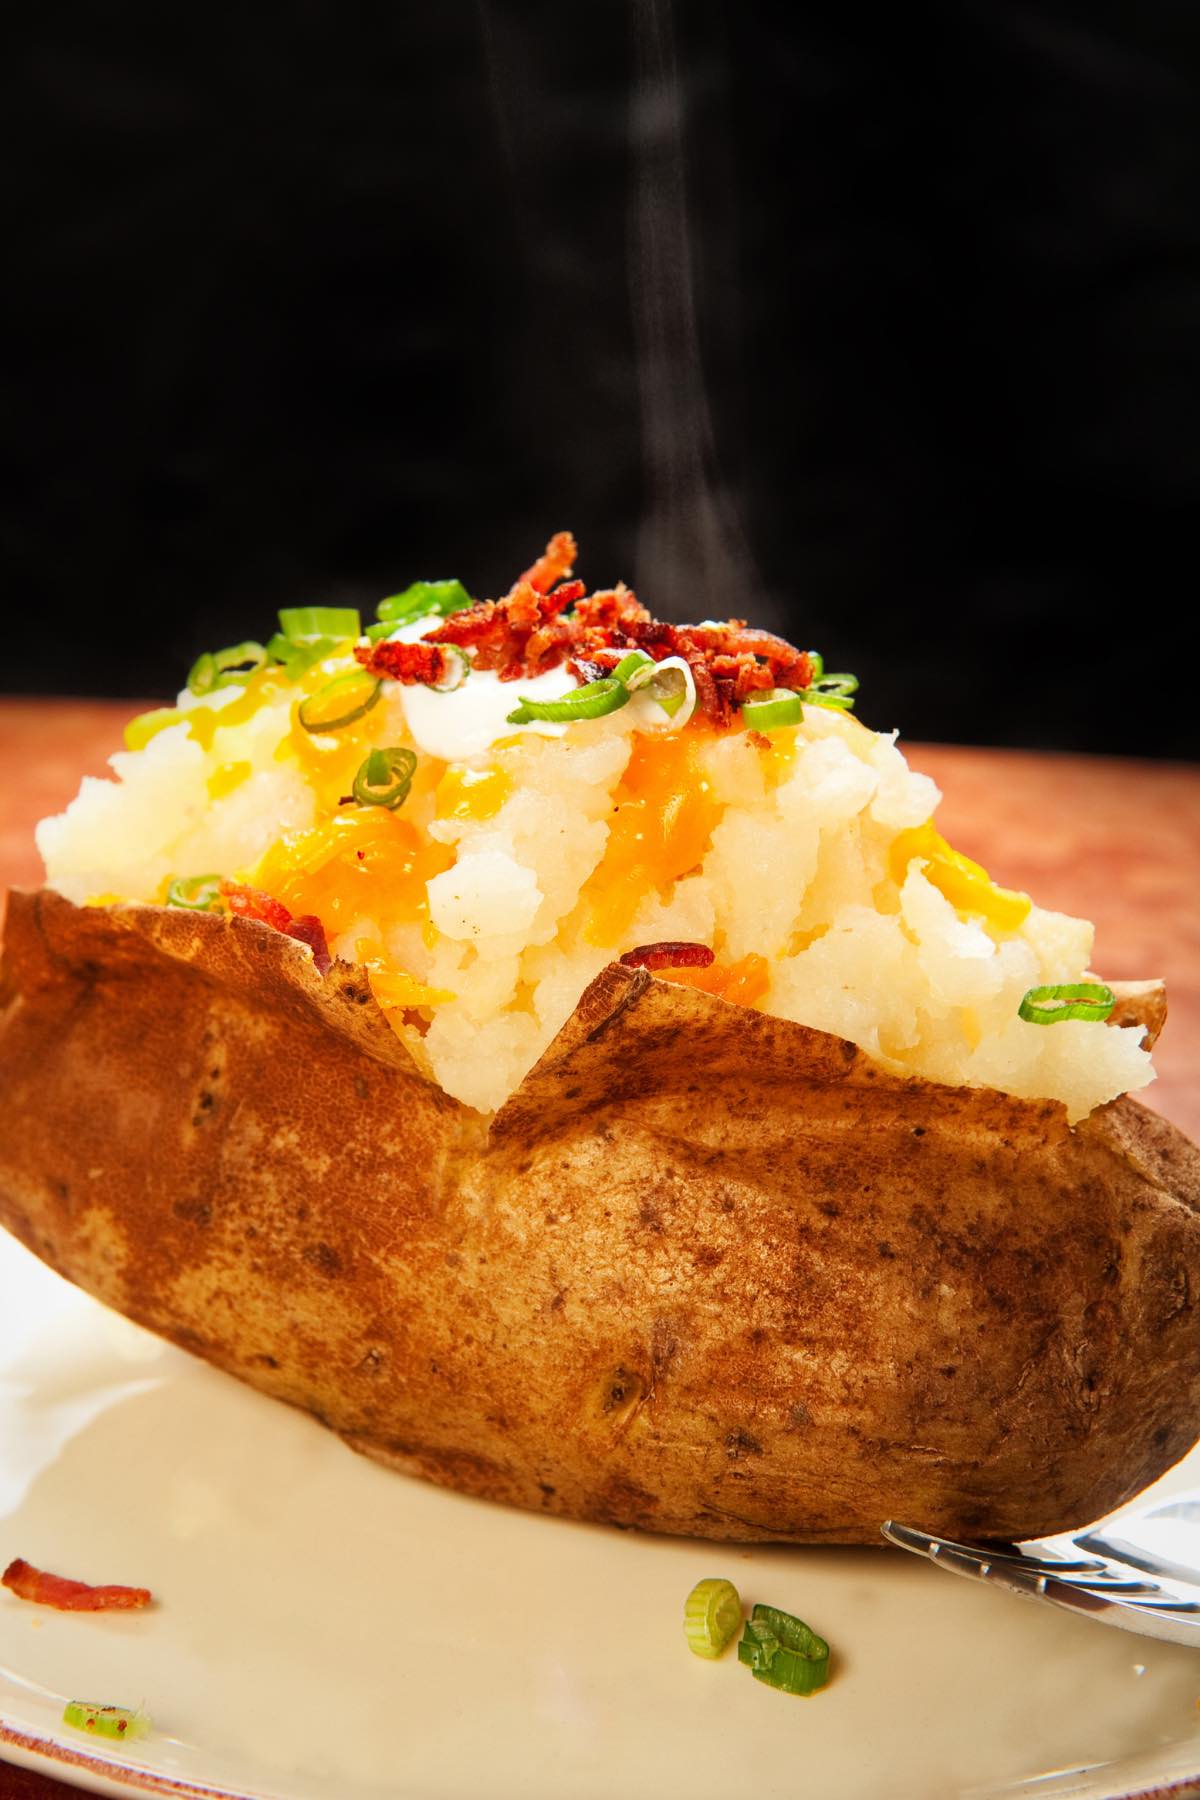 A fluffy baked potato with favorite toppings including butter, bacon bits and green onions